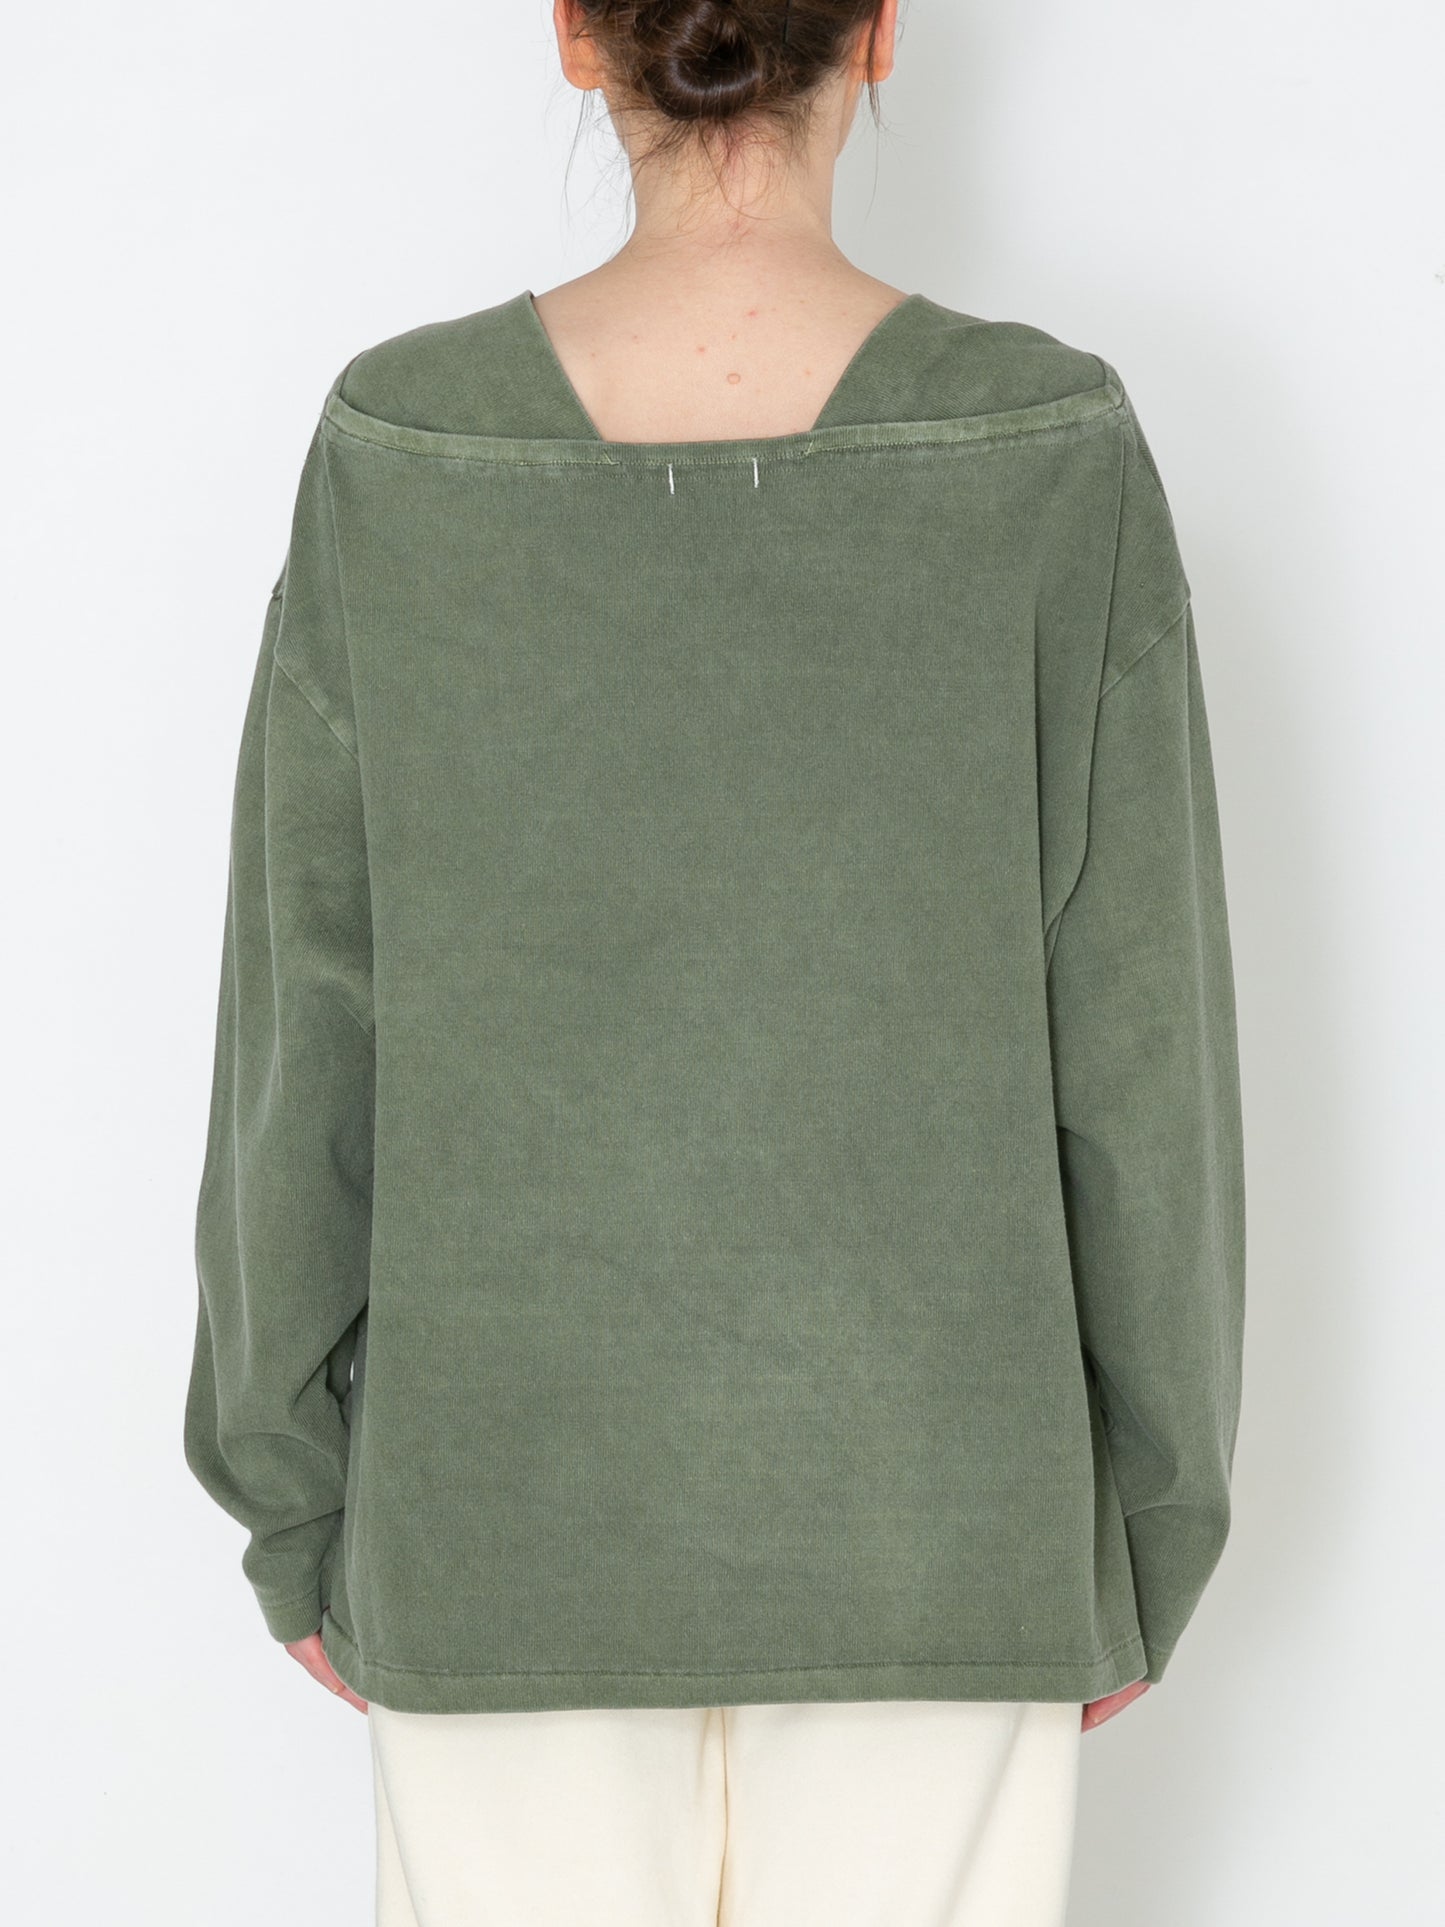 BAGGY BOAT L/S TEE COTTON JERSEY AM-C0107 Olive